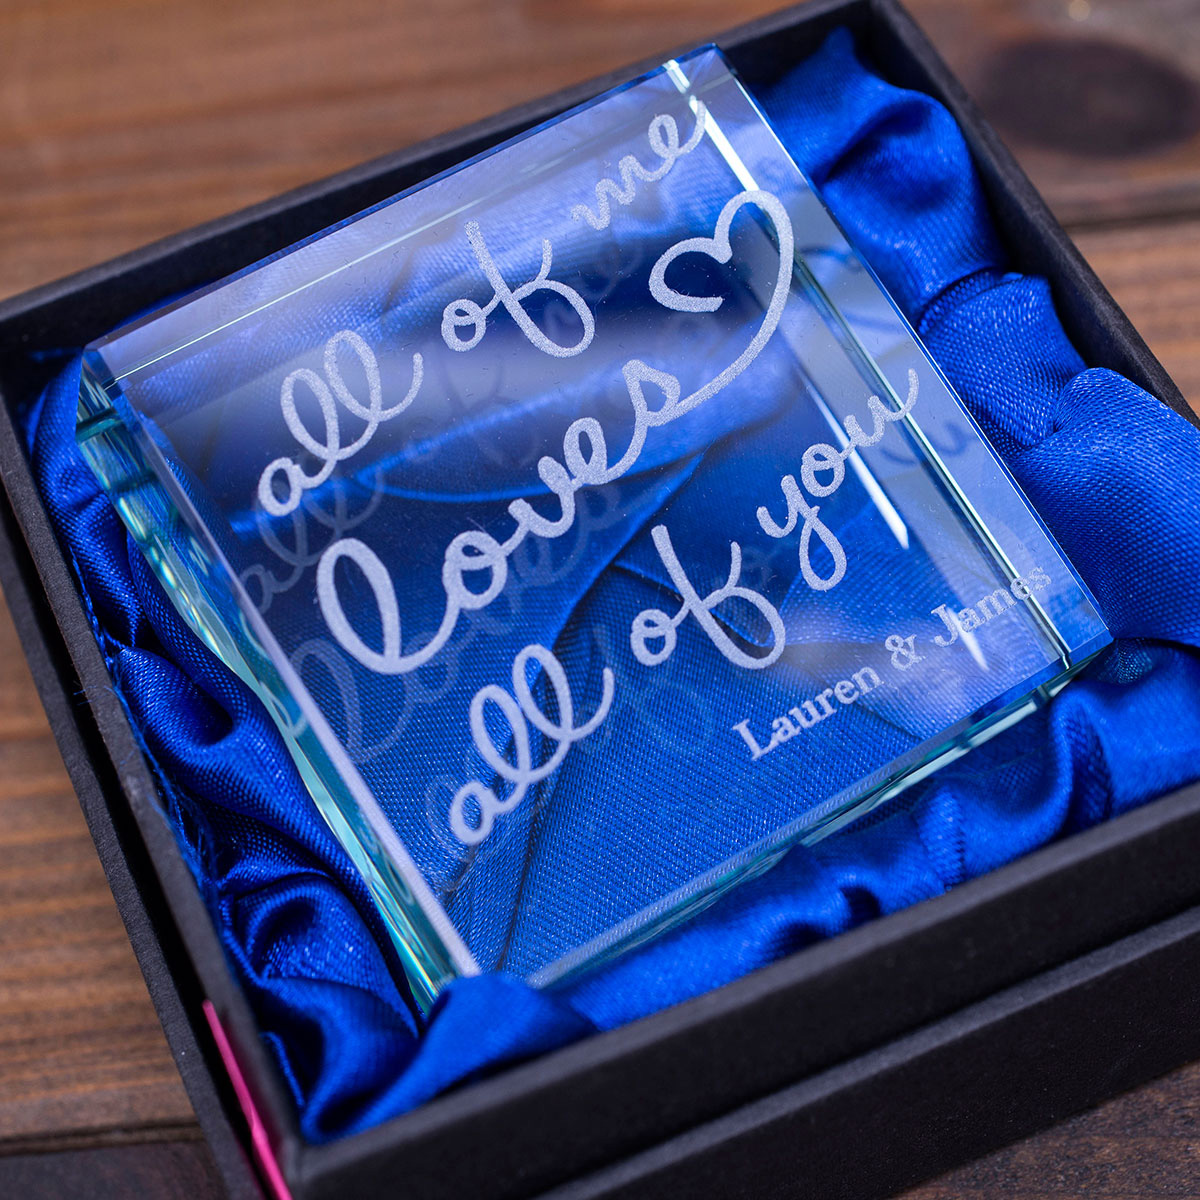 Personalised Engraved Glass Token - All Of Me Loves All Of You